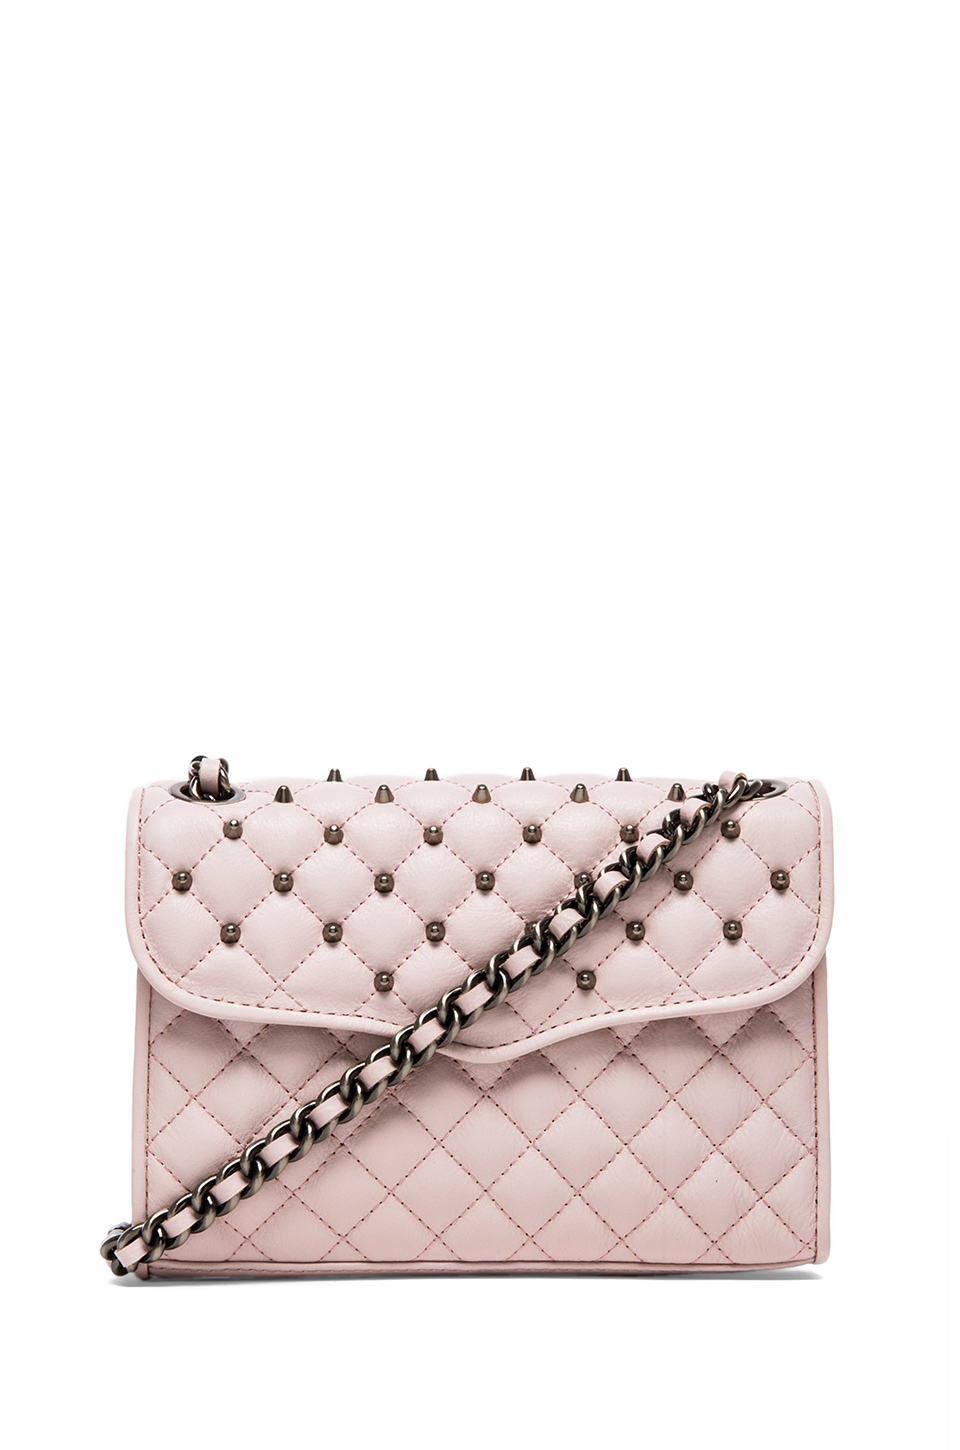 Rebecca Minkoff Quilted Mini Affair with Studs in Pale Pink (Pink) - Lyst